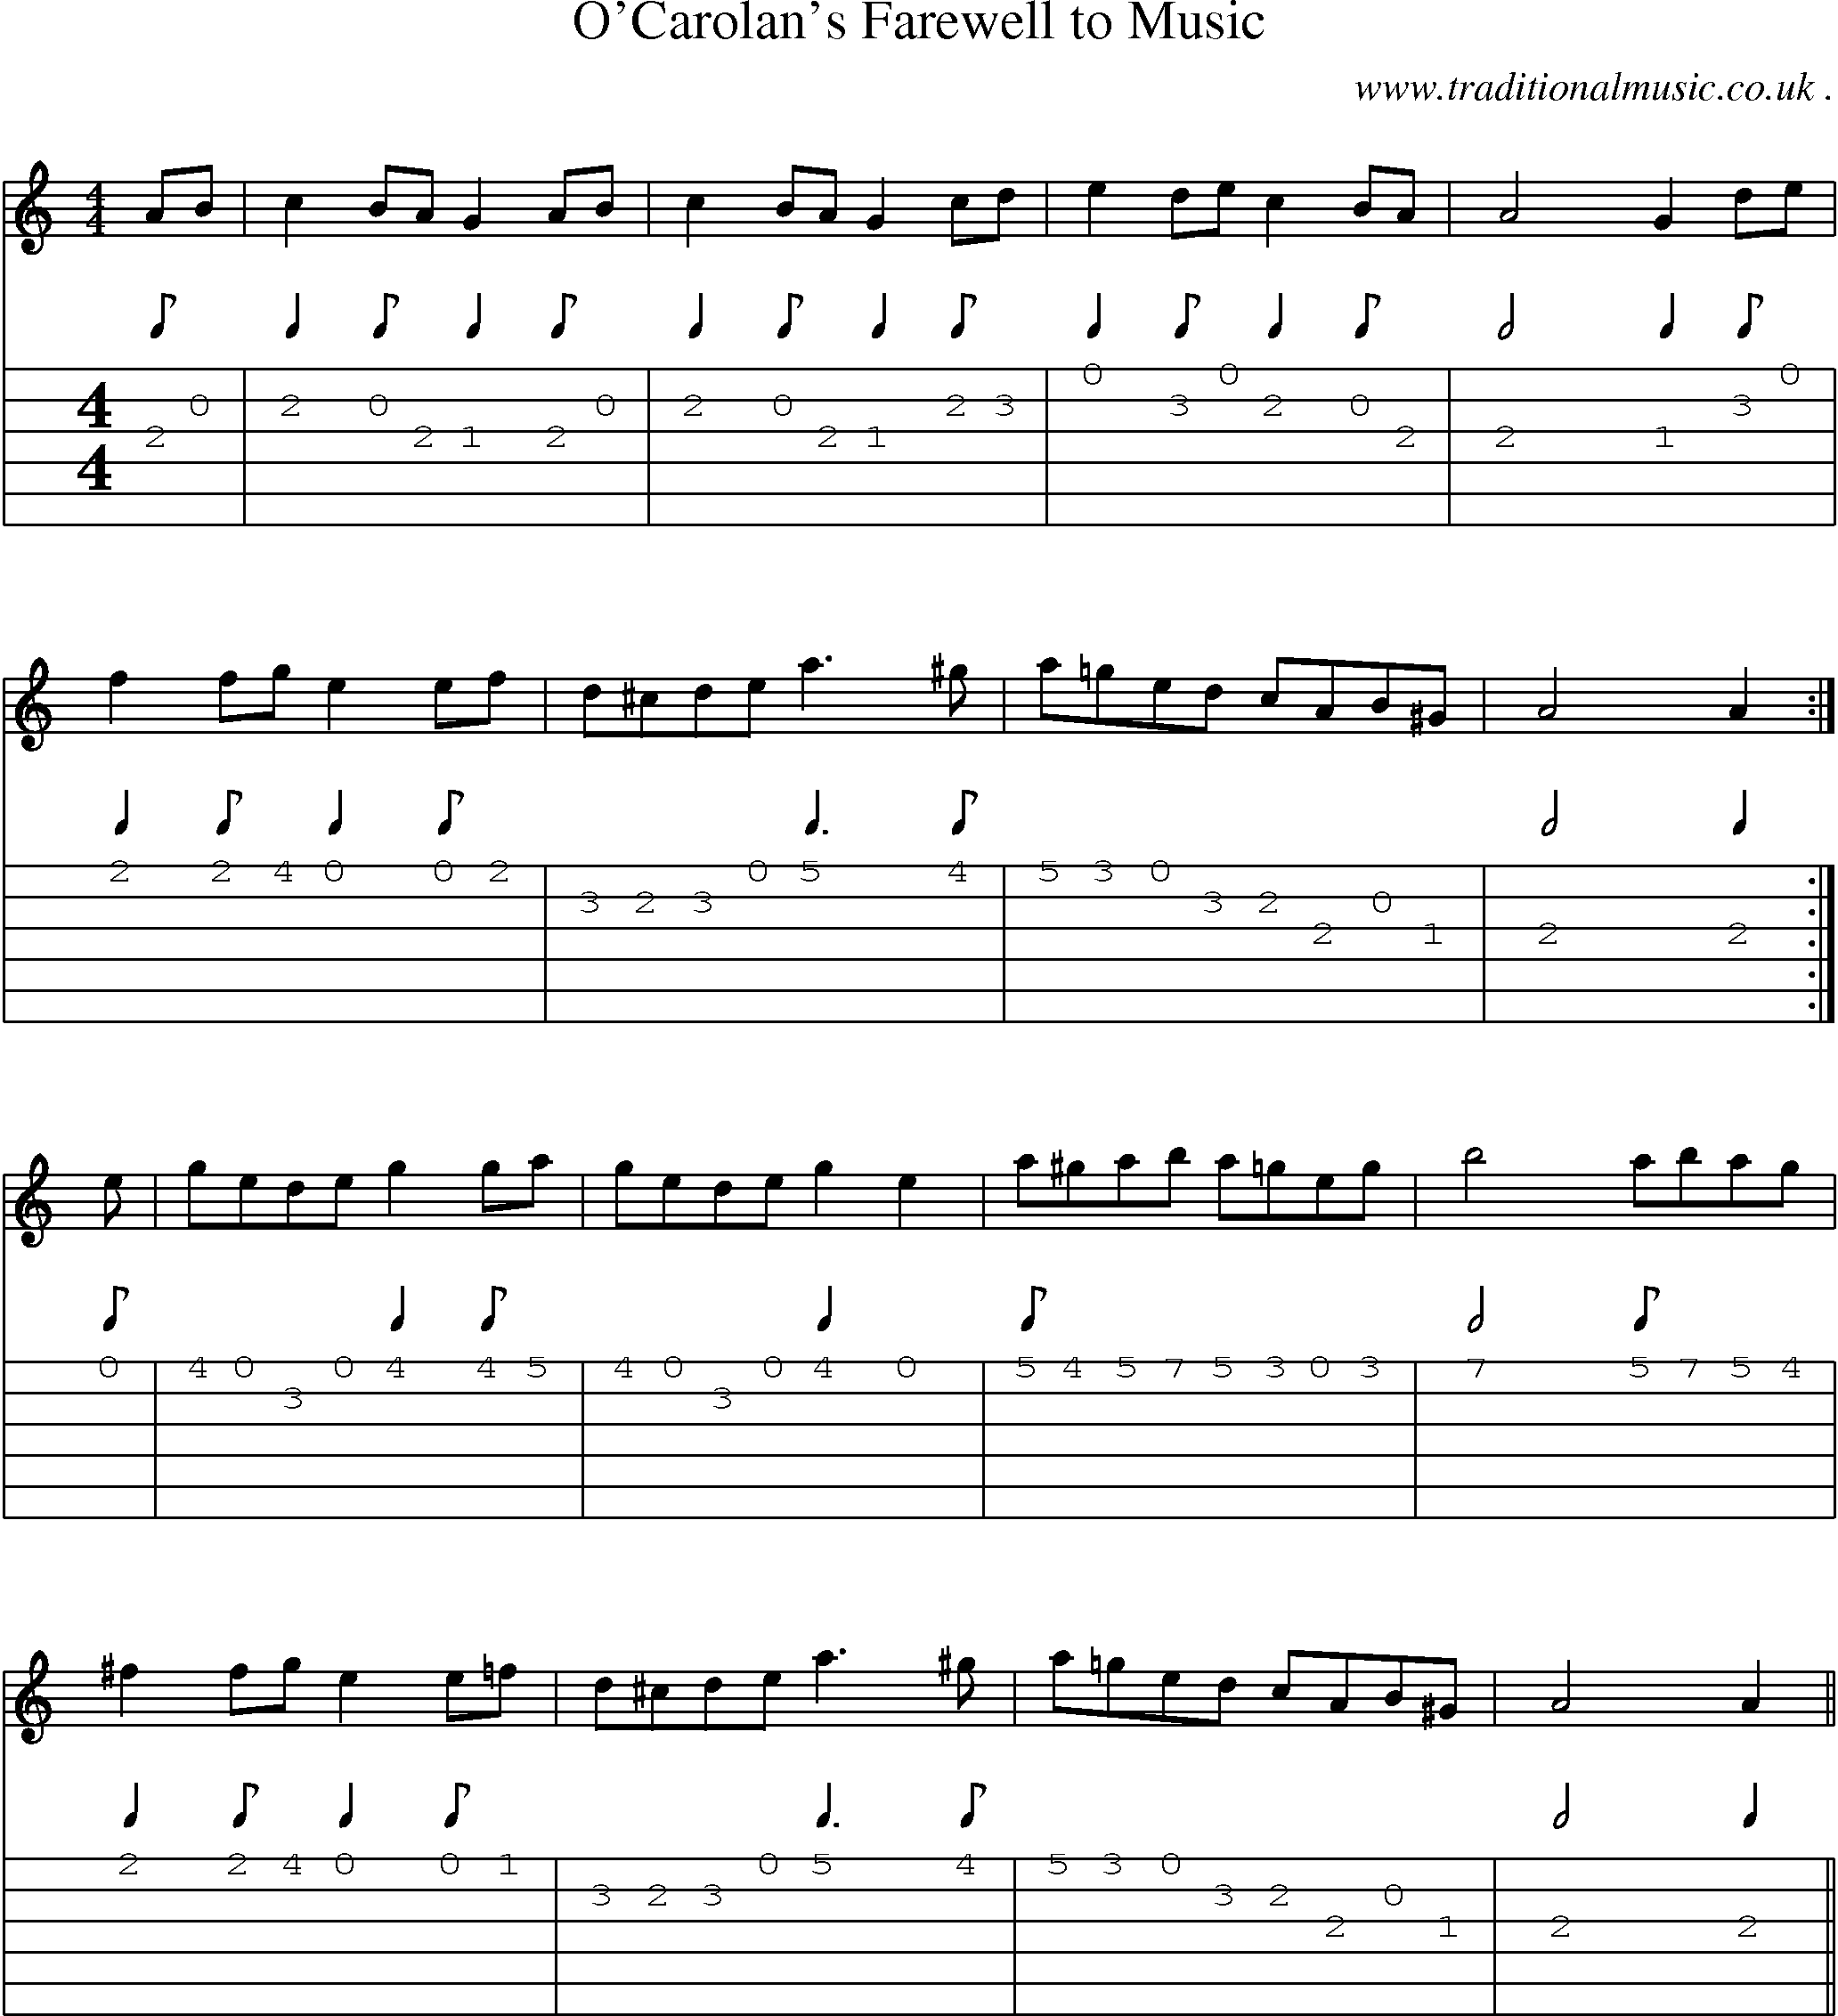 Sheet-Music and Guitar Tabs for Ocarolans Farewell To Music